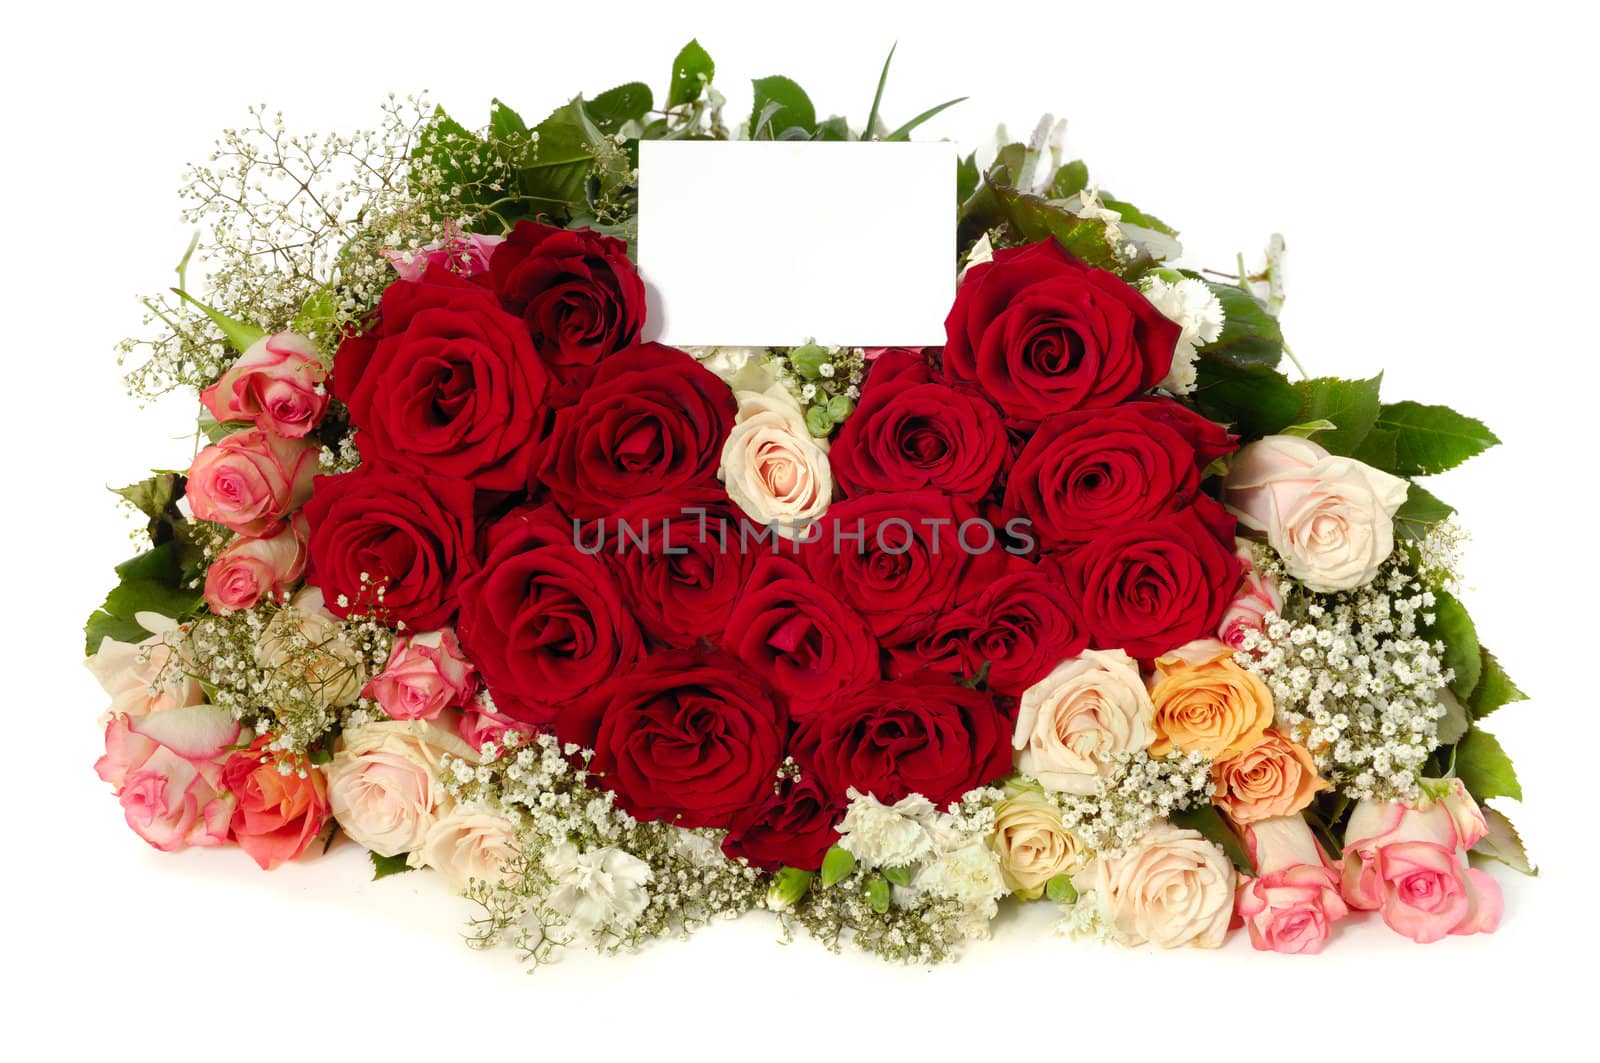 Bouquet of rose flowers with a blank gift card, isolated on white background. The roses are arranged in heart shape.